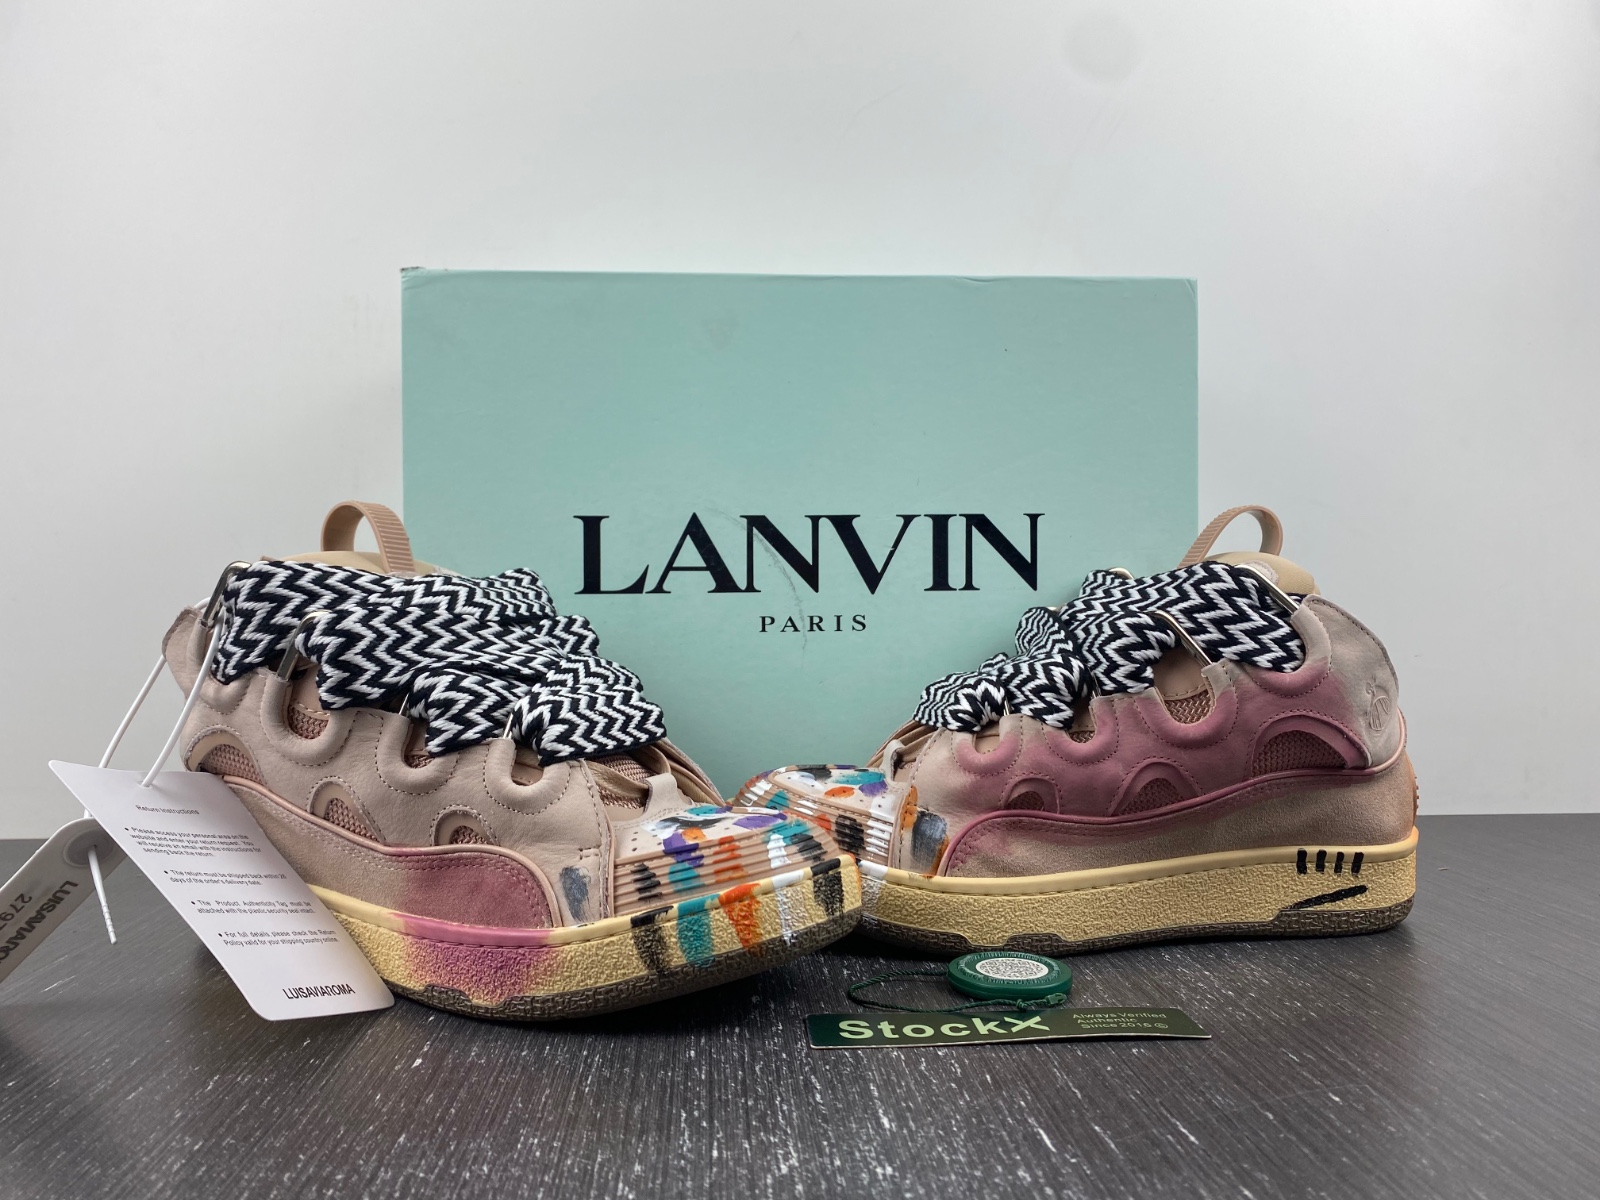 Lanvin Leather Curb Gallery Dept. Pale Pink Multi FW-SKDK02-DRGD-P22B5S0